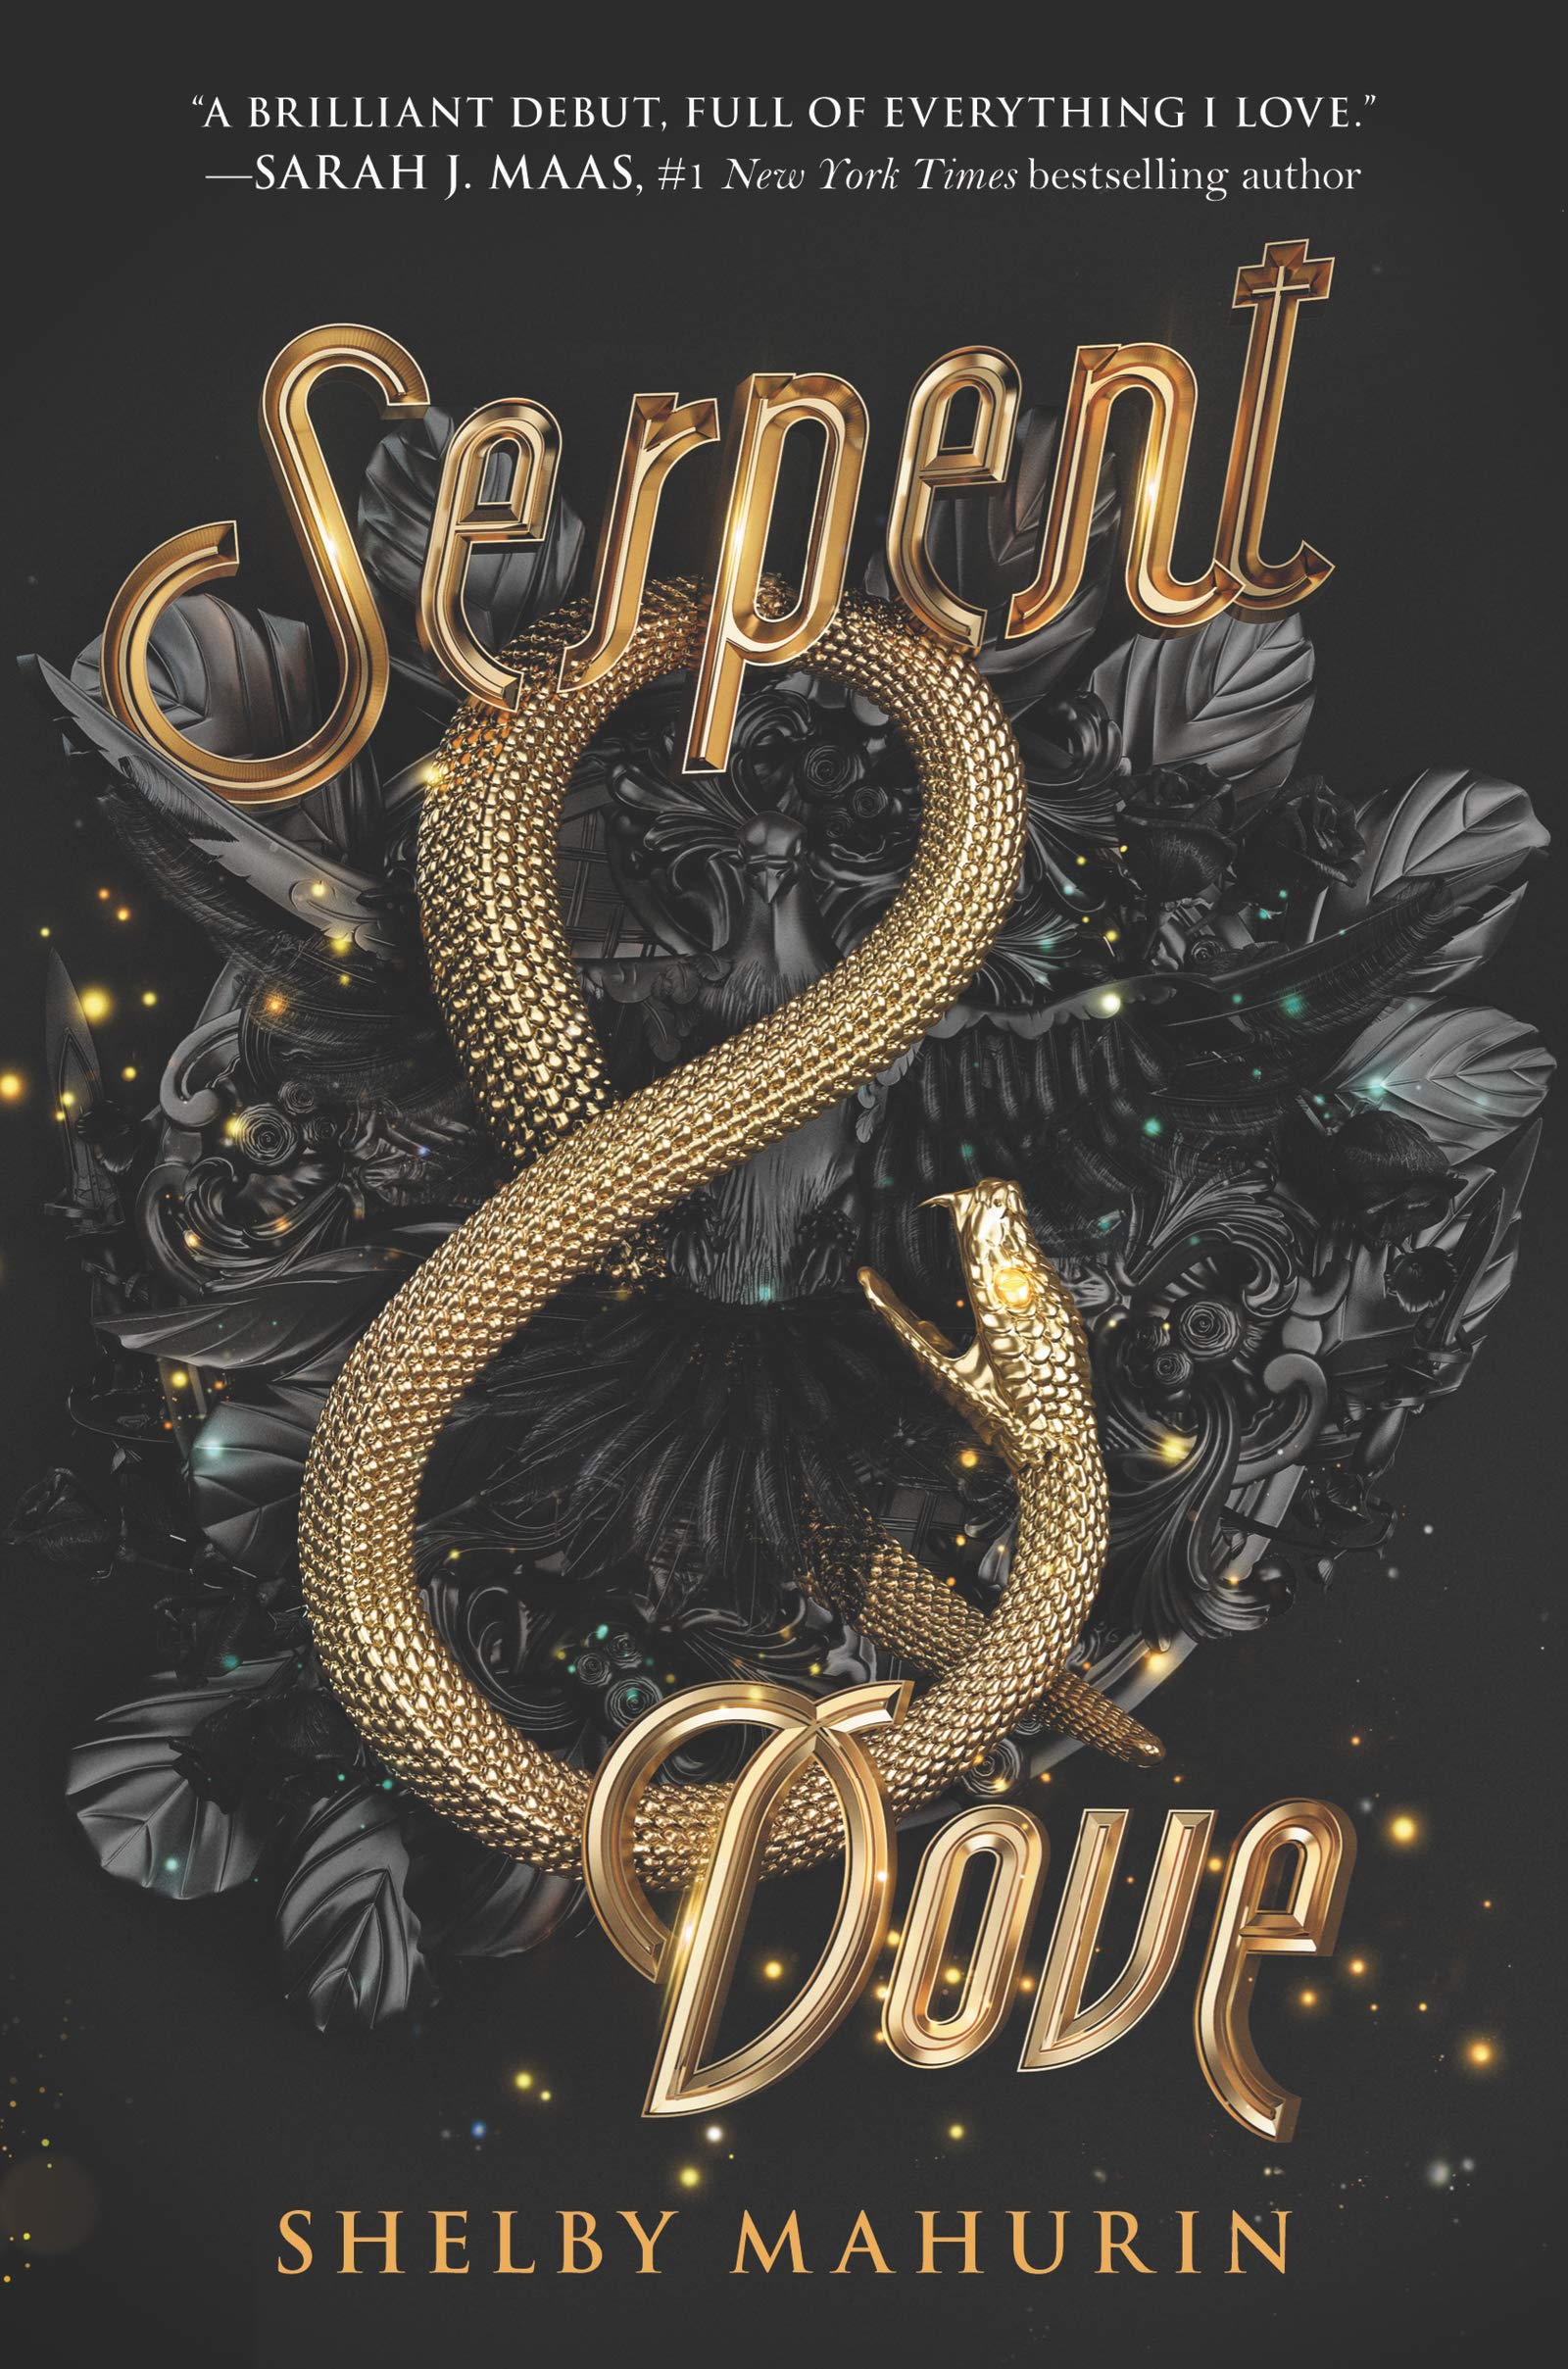 Book Cover_Teens_Serpent and Dove